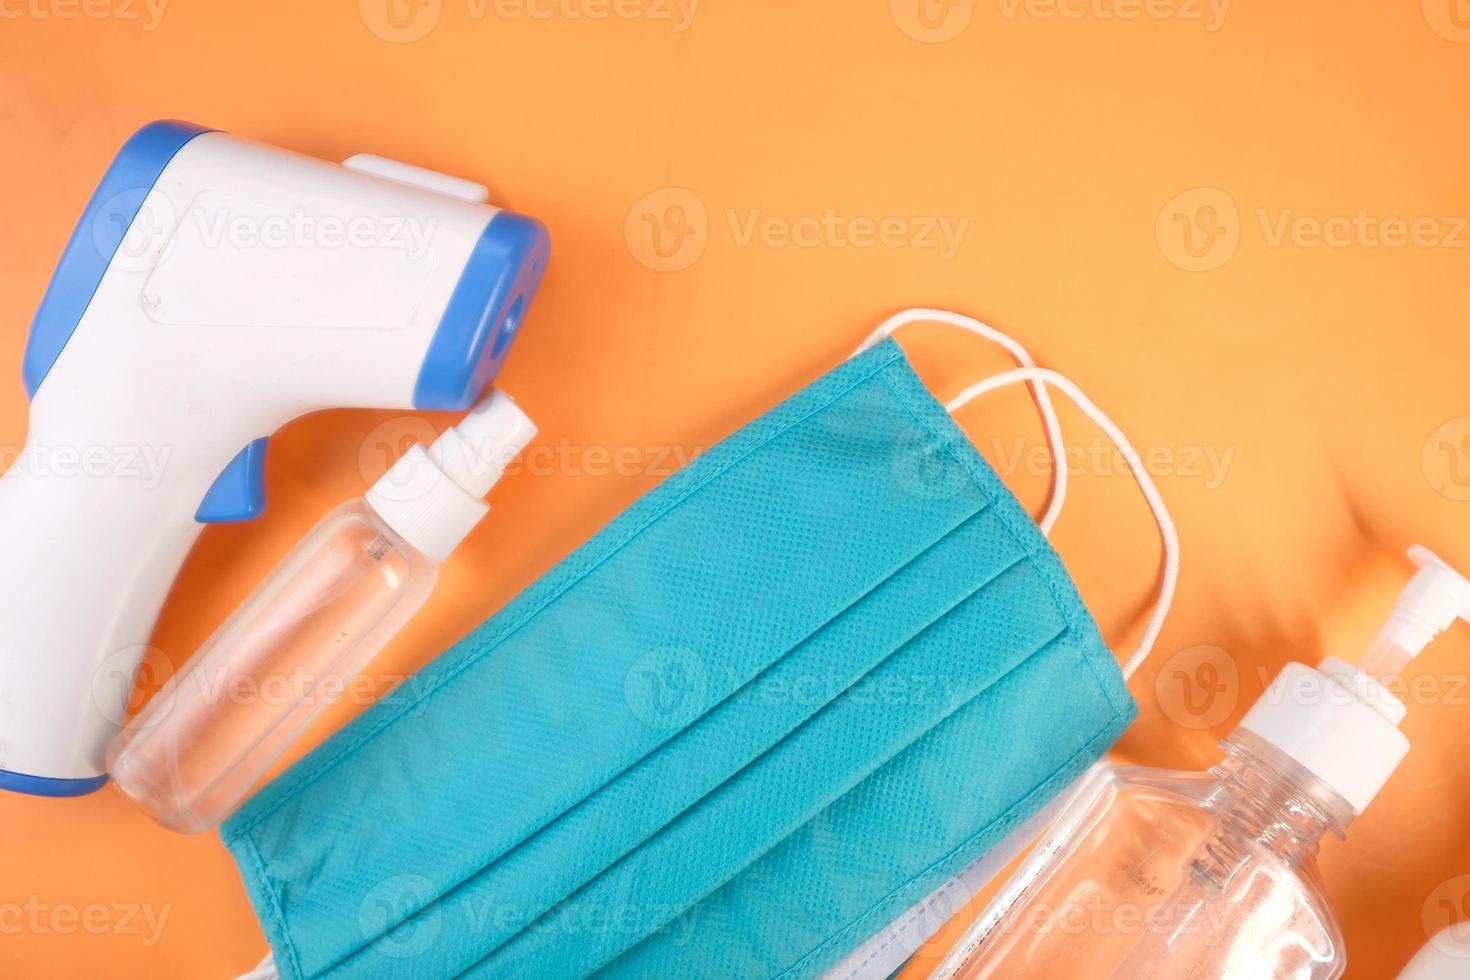 Surgical masks, thermometer, and hand sanitizer on orange background photo